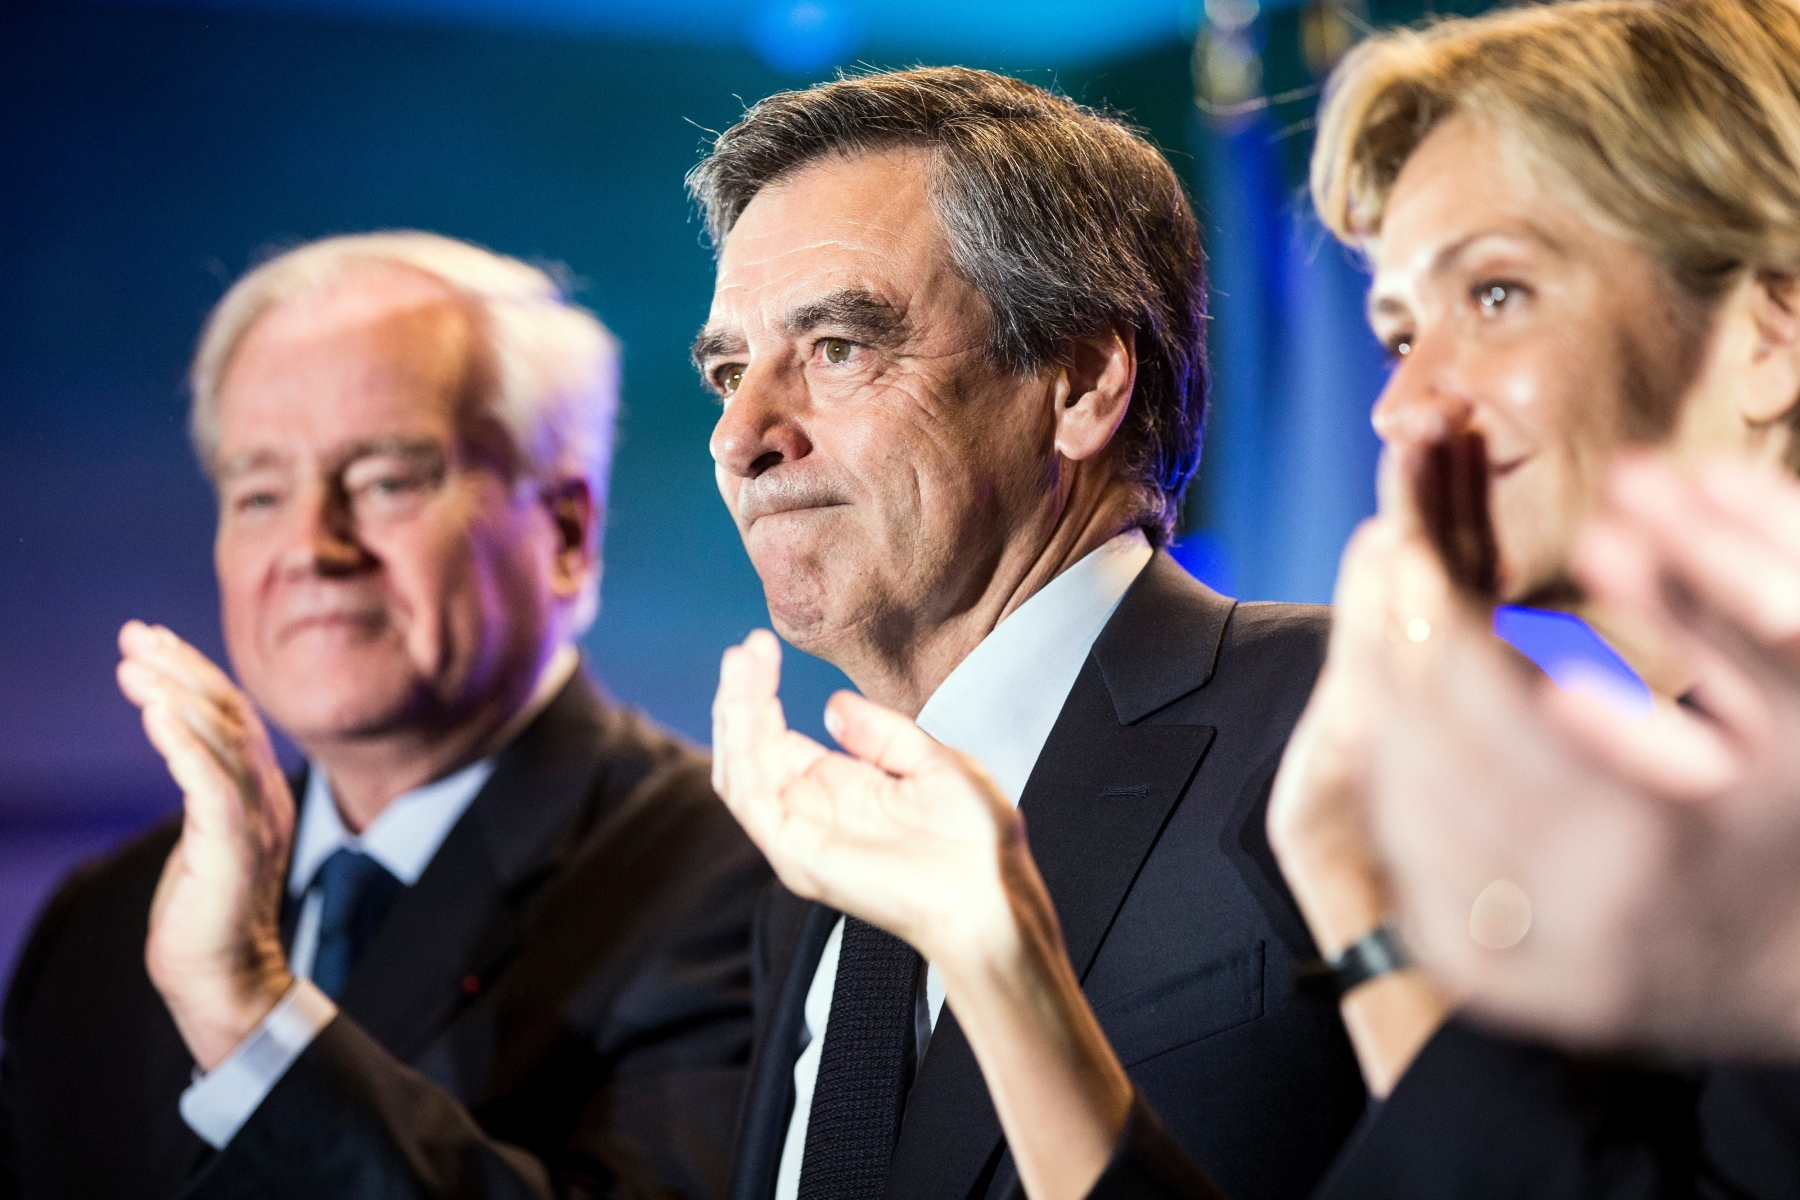 epa05813115 Les Republicans party candidate for 2017 presidential election, Francois Fillon (C) arrives for a campaign rally in Paris, France, 24 February 2017. According to media reports, Fillon is still under scrutiny to explain the previous employment of his wife Penelope as a parliamentary aide while he was an MP and to give details of her work. He has also been hit by new claims that he also employed his children as 'parliamentary assistants'. French MPs are allowed to employ family members as aides. French presidential elections are planned for 23 April and 07 May 2017.  EPA/ETIENNE LAURENT FRANCE ELECTIONS CAMPAIGN FILLON